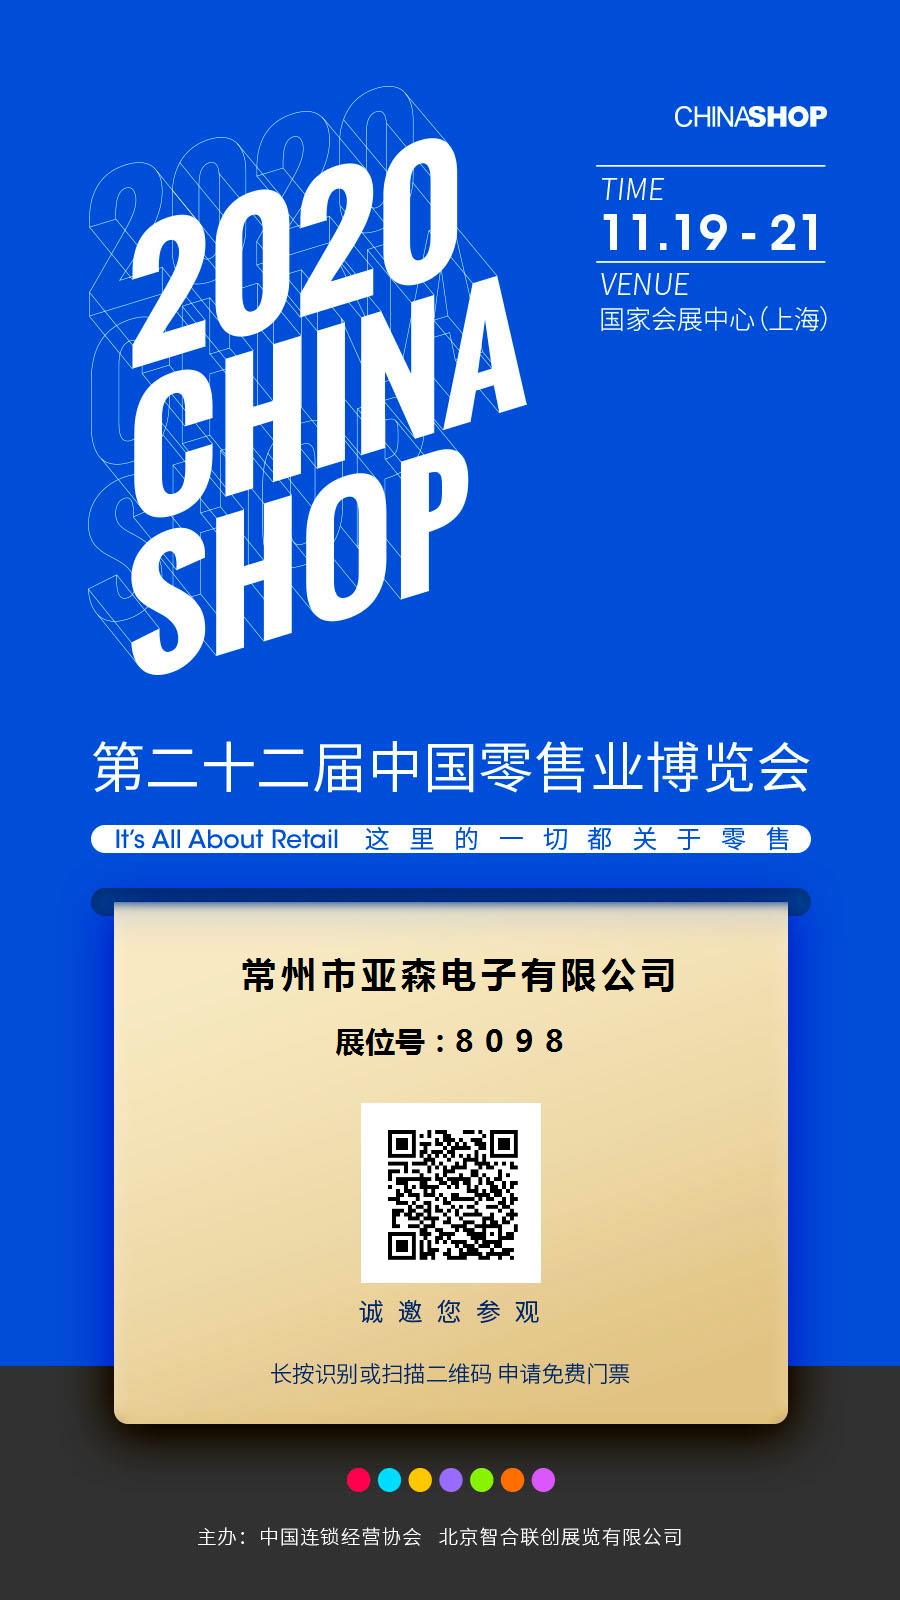 Welcome to China shop  DURING Nov.19-21 OF 2020, OUR COMPANY PARTICIPATES IN 2020Shanghai China shop